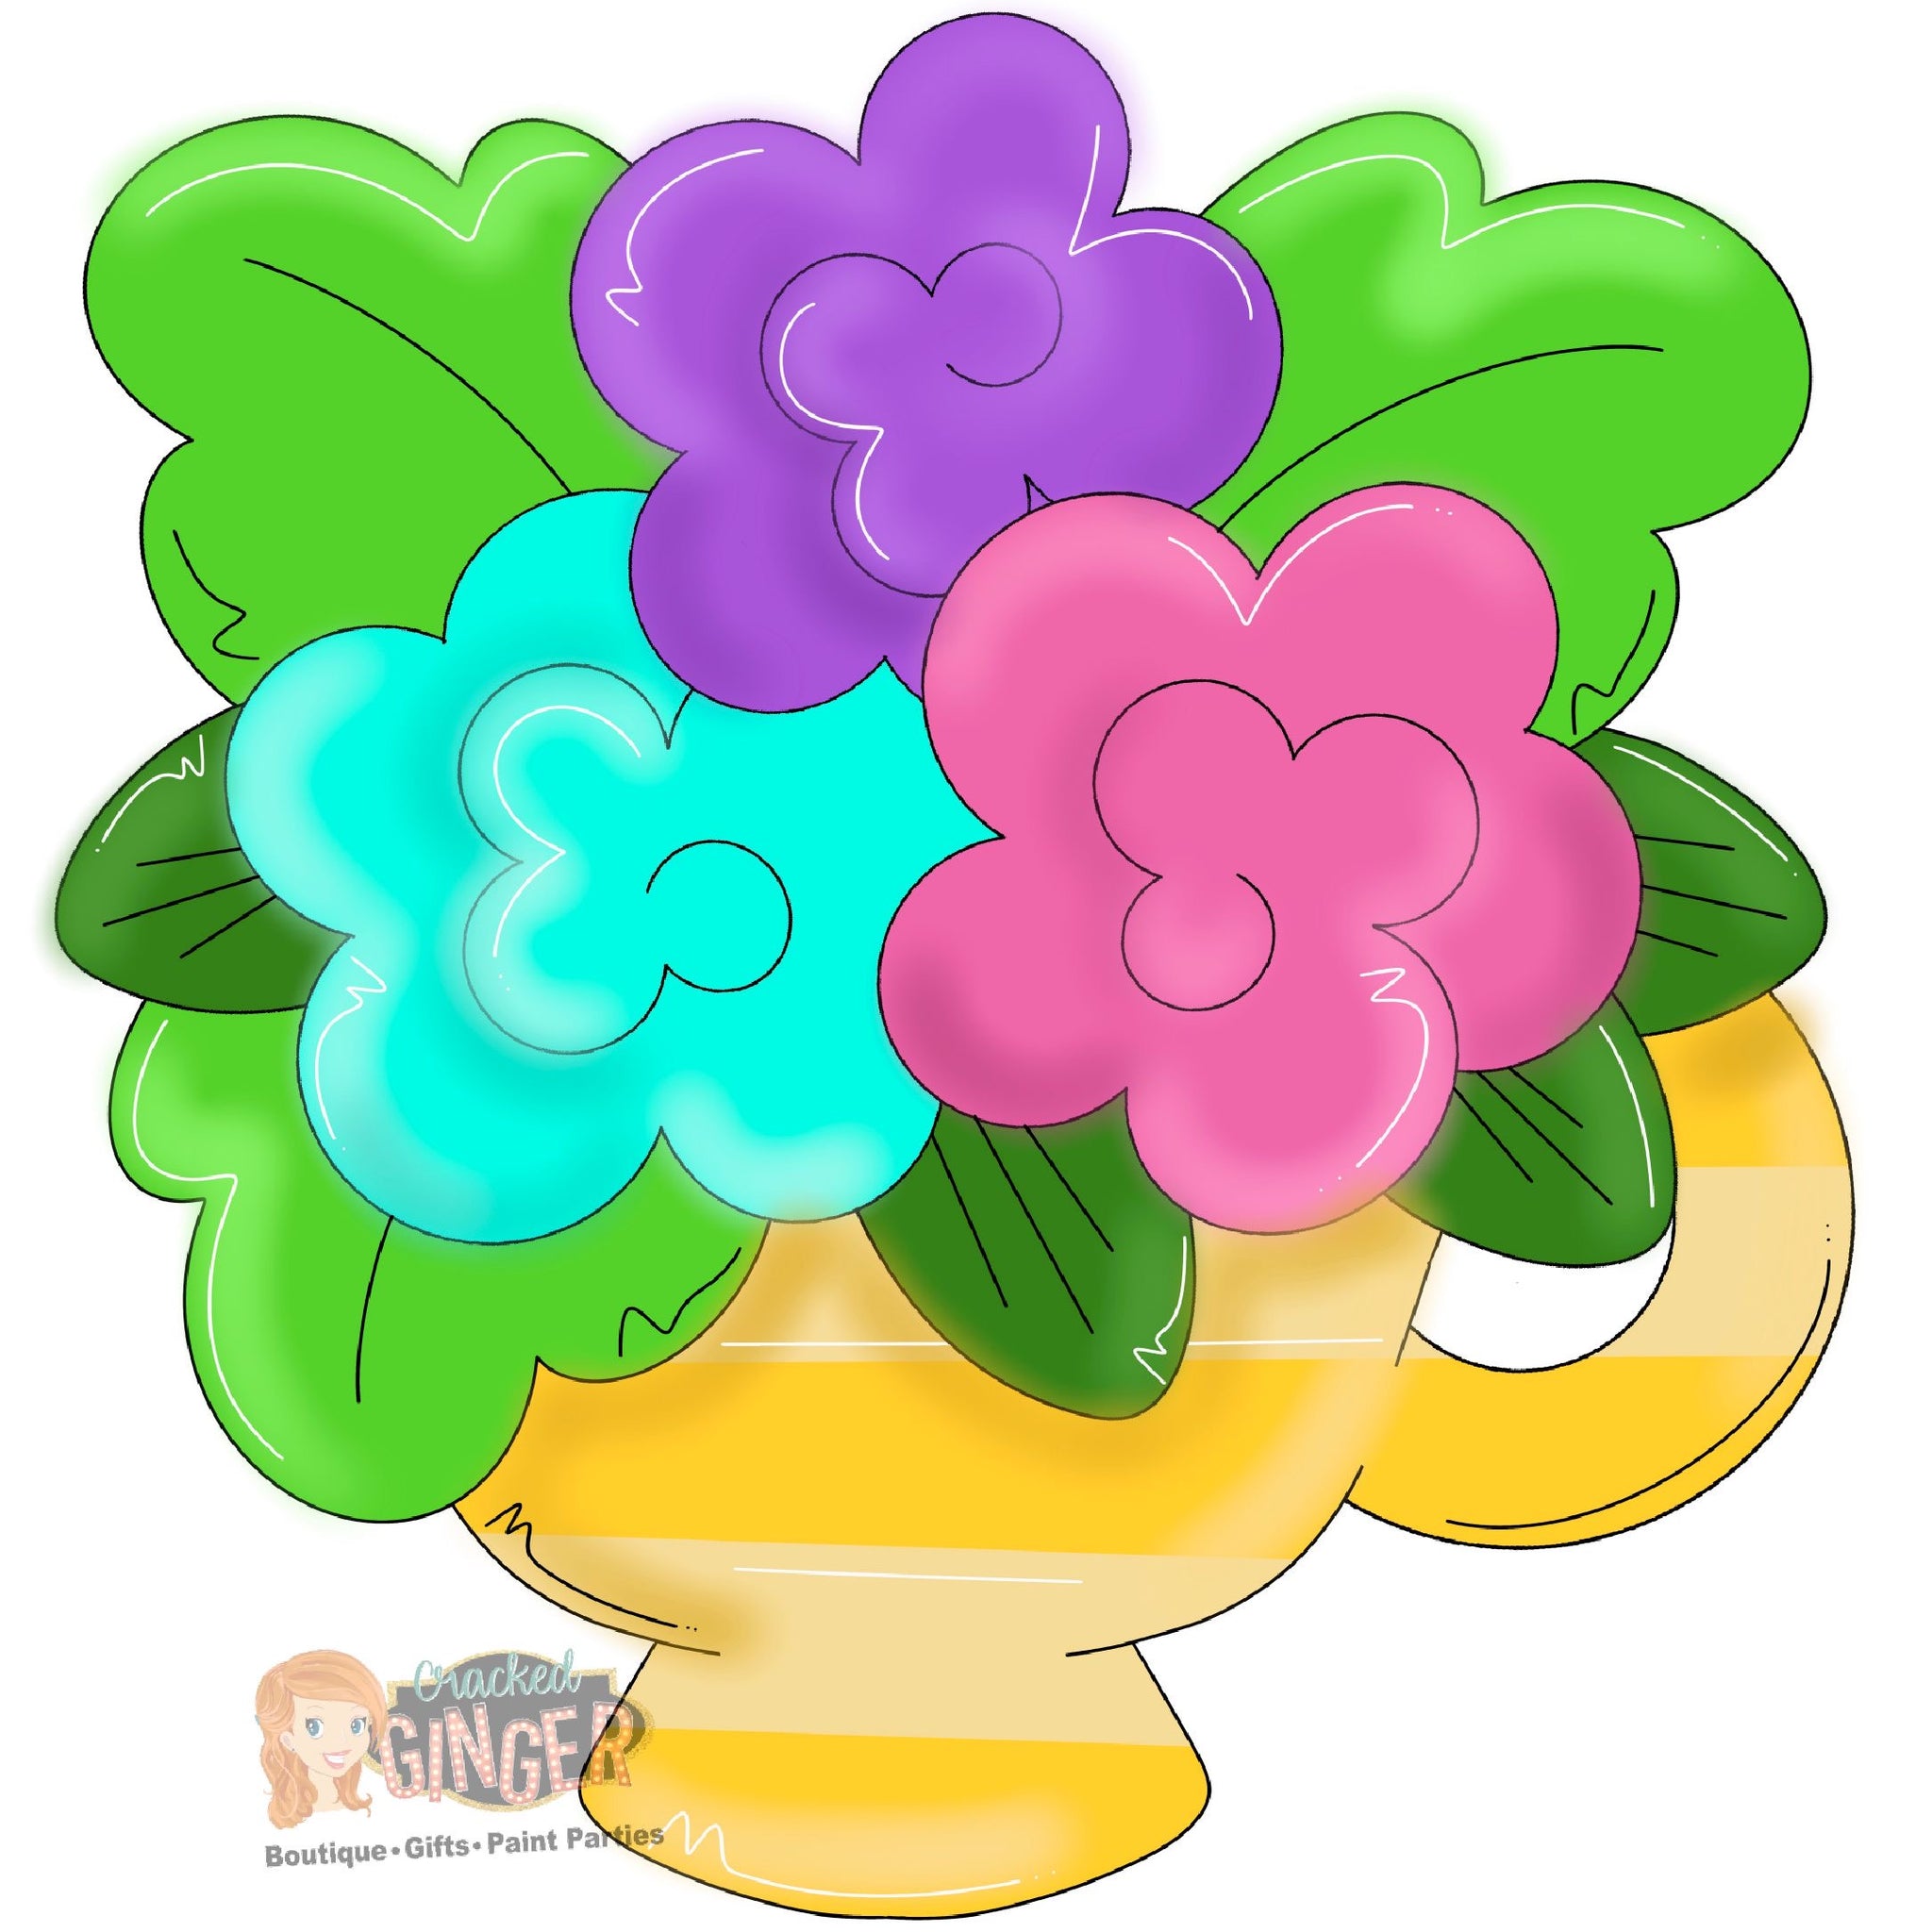 Teacup of flowers Cutout and Kits